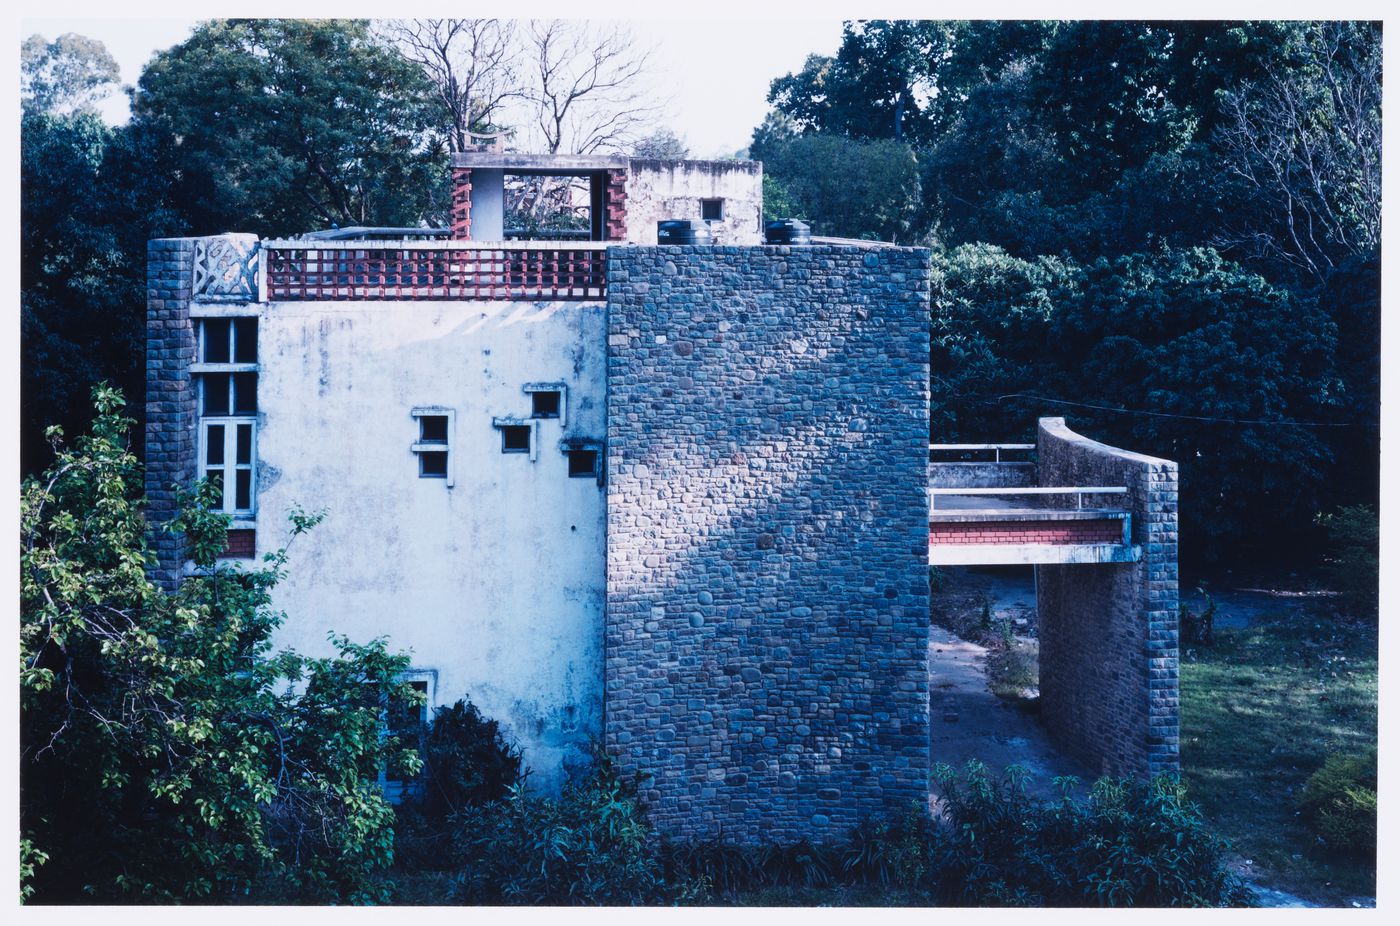 View of the architect's home (Type 4-J), Sector 5, Chandigarh, India